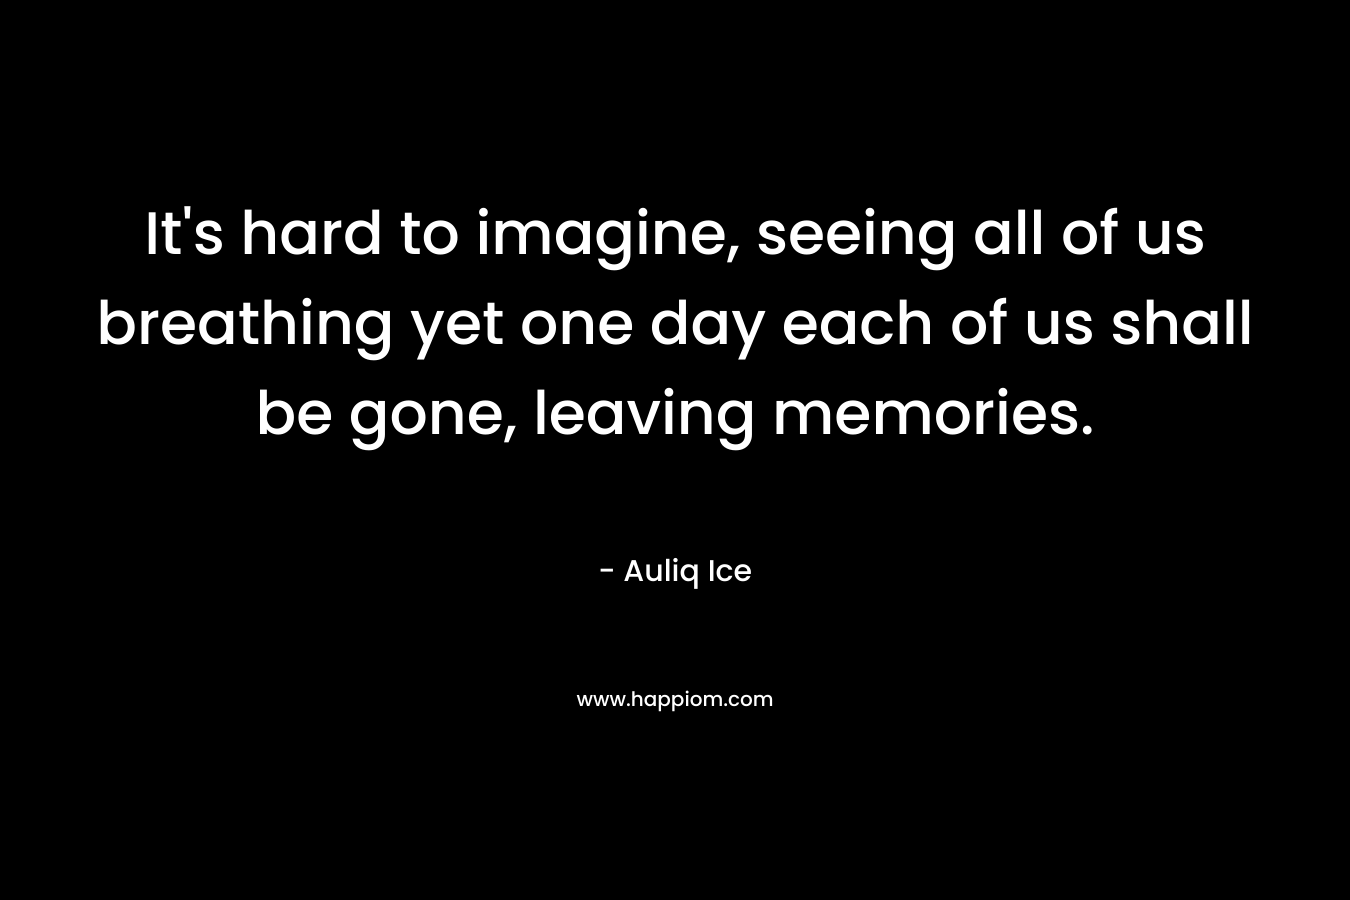 It's hard to imagine, seeing all of us breathing yet one day each of us shall be gone, leaving memories.